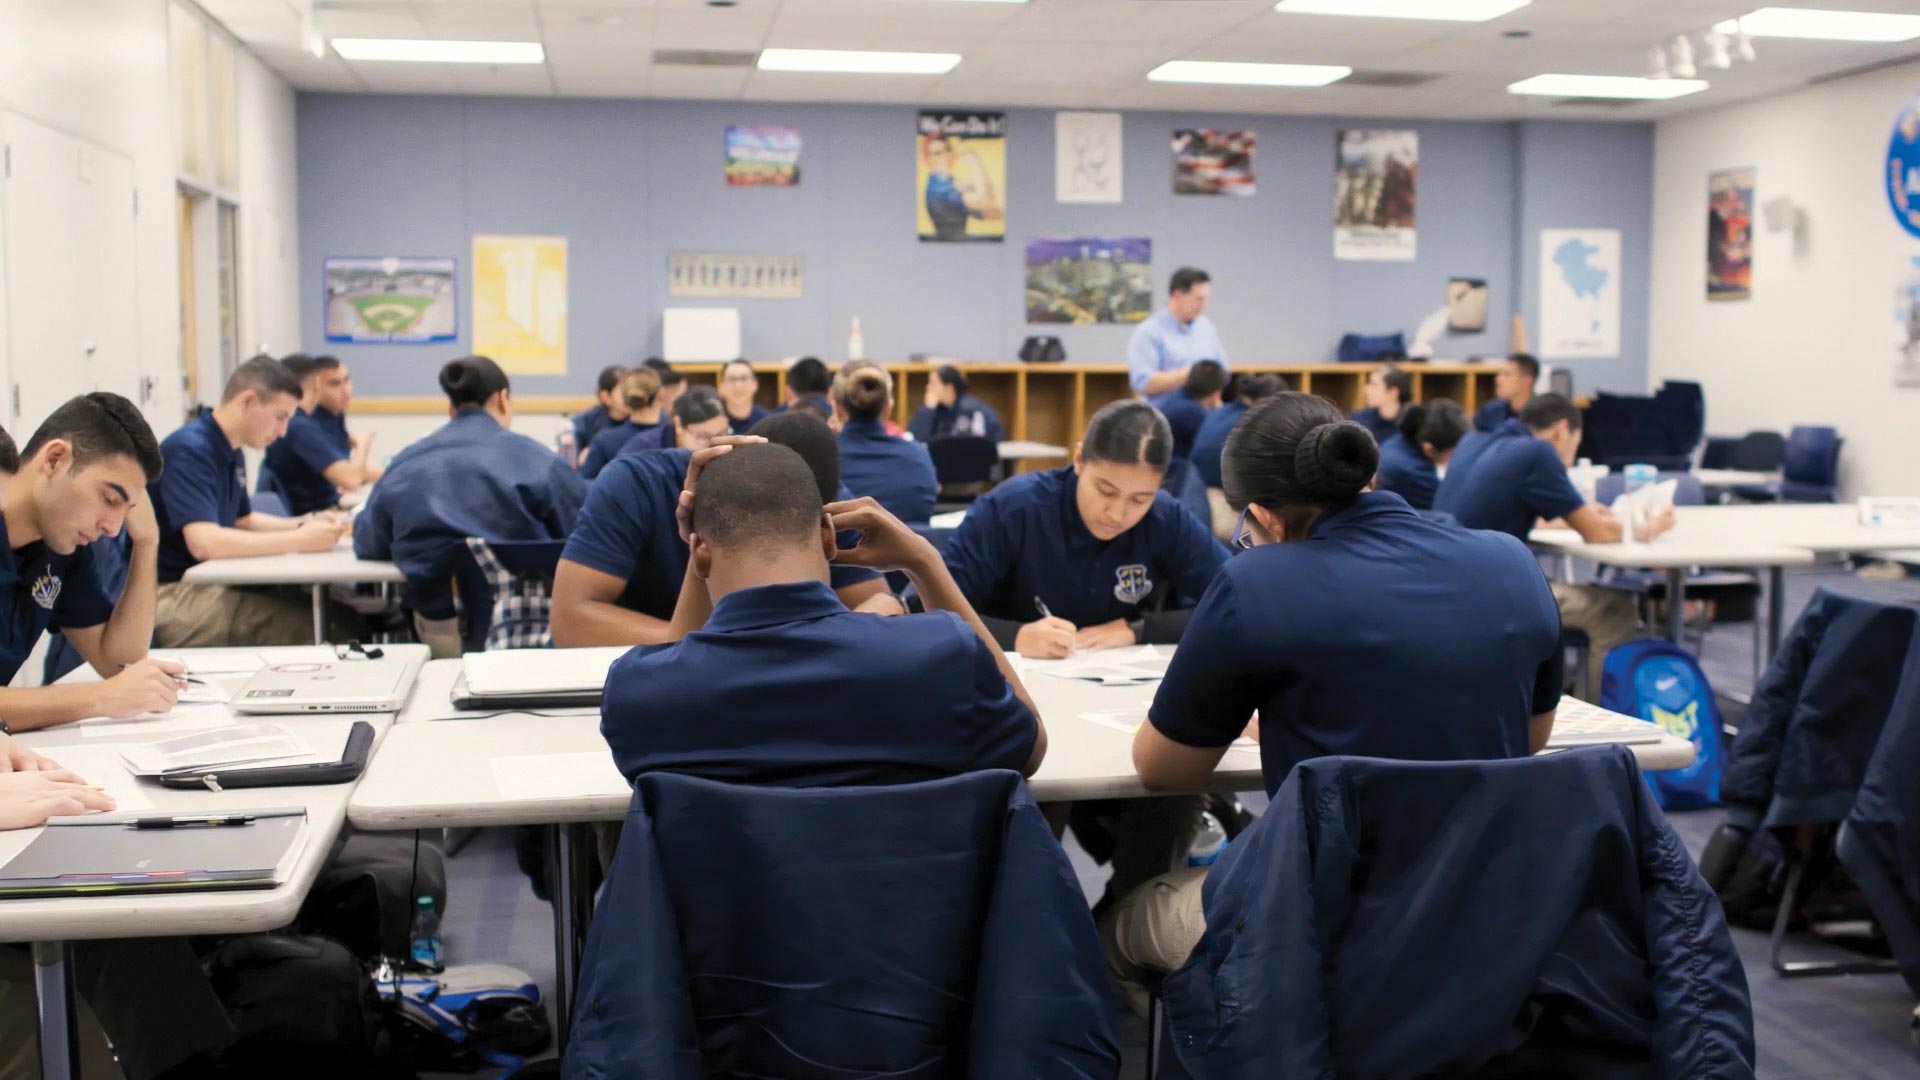 Young police trainees in Los Angeles, California, learn through a program created by the city’s innovation team to keep them engaged in the recruitment process until they can become sworn officers at age 21.